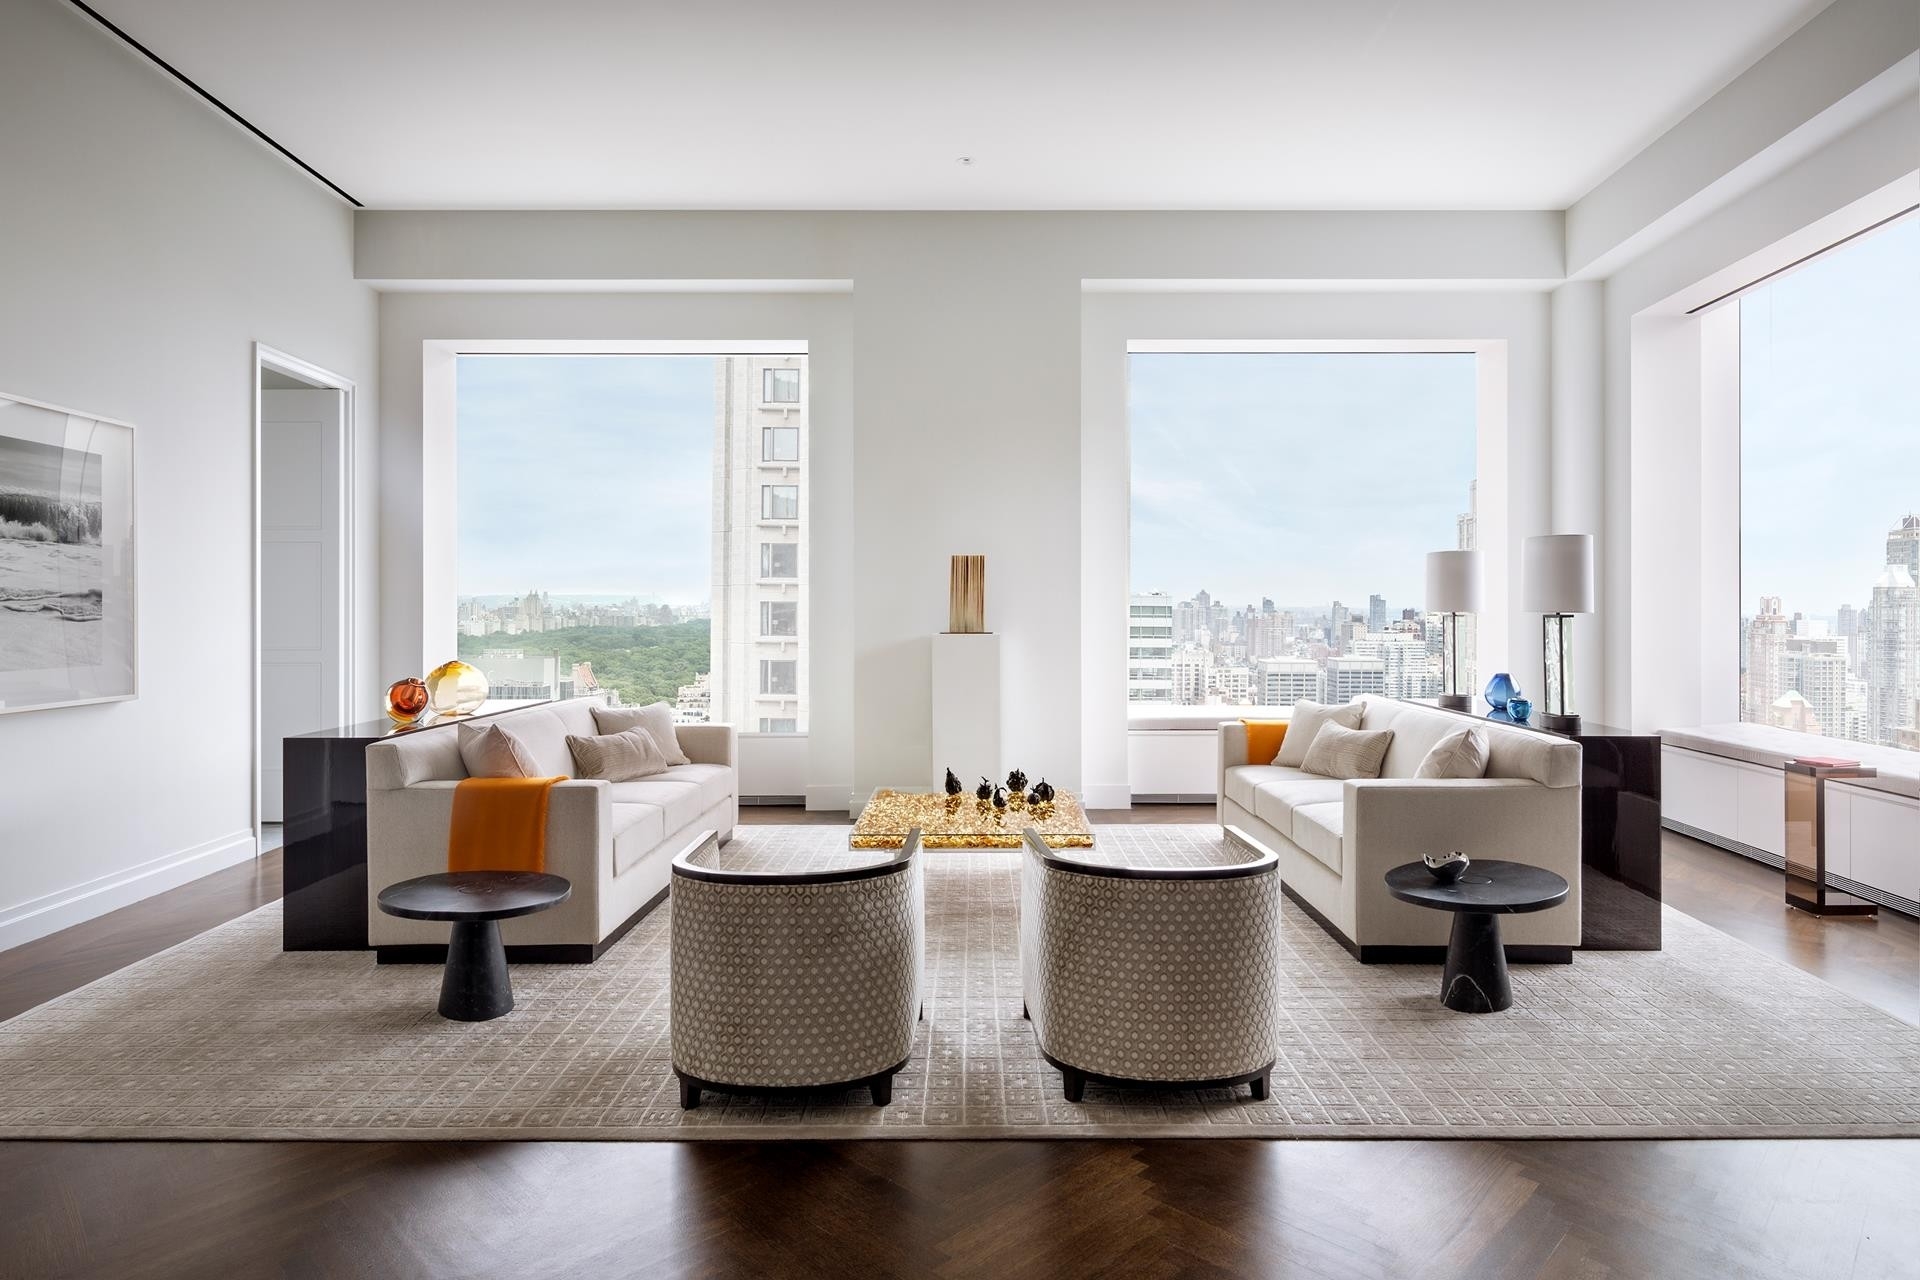 Property at 432 PARK AVE, 36B Midtown East, New York, New York 10022